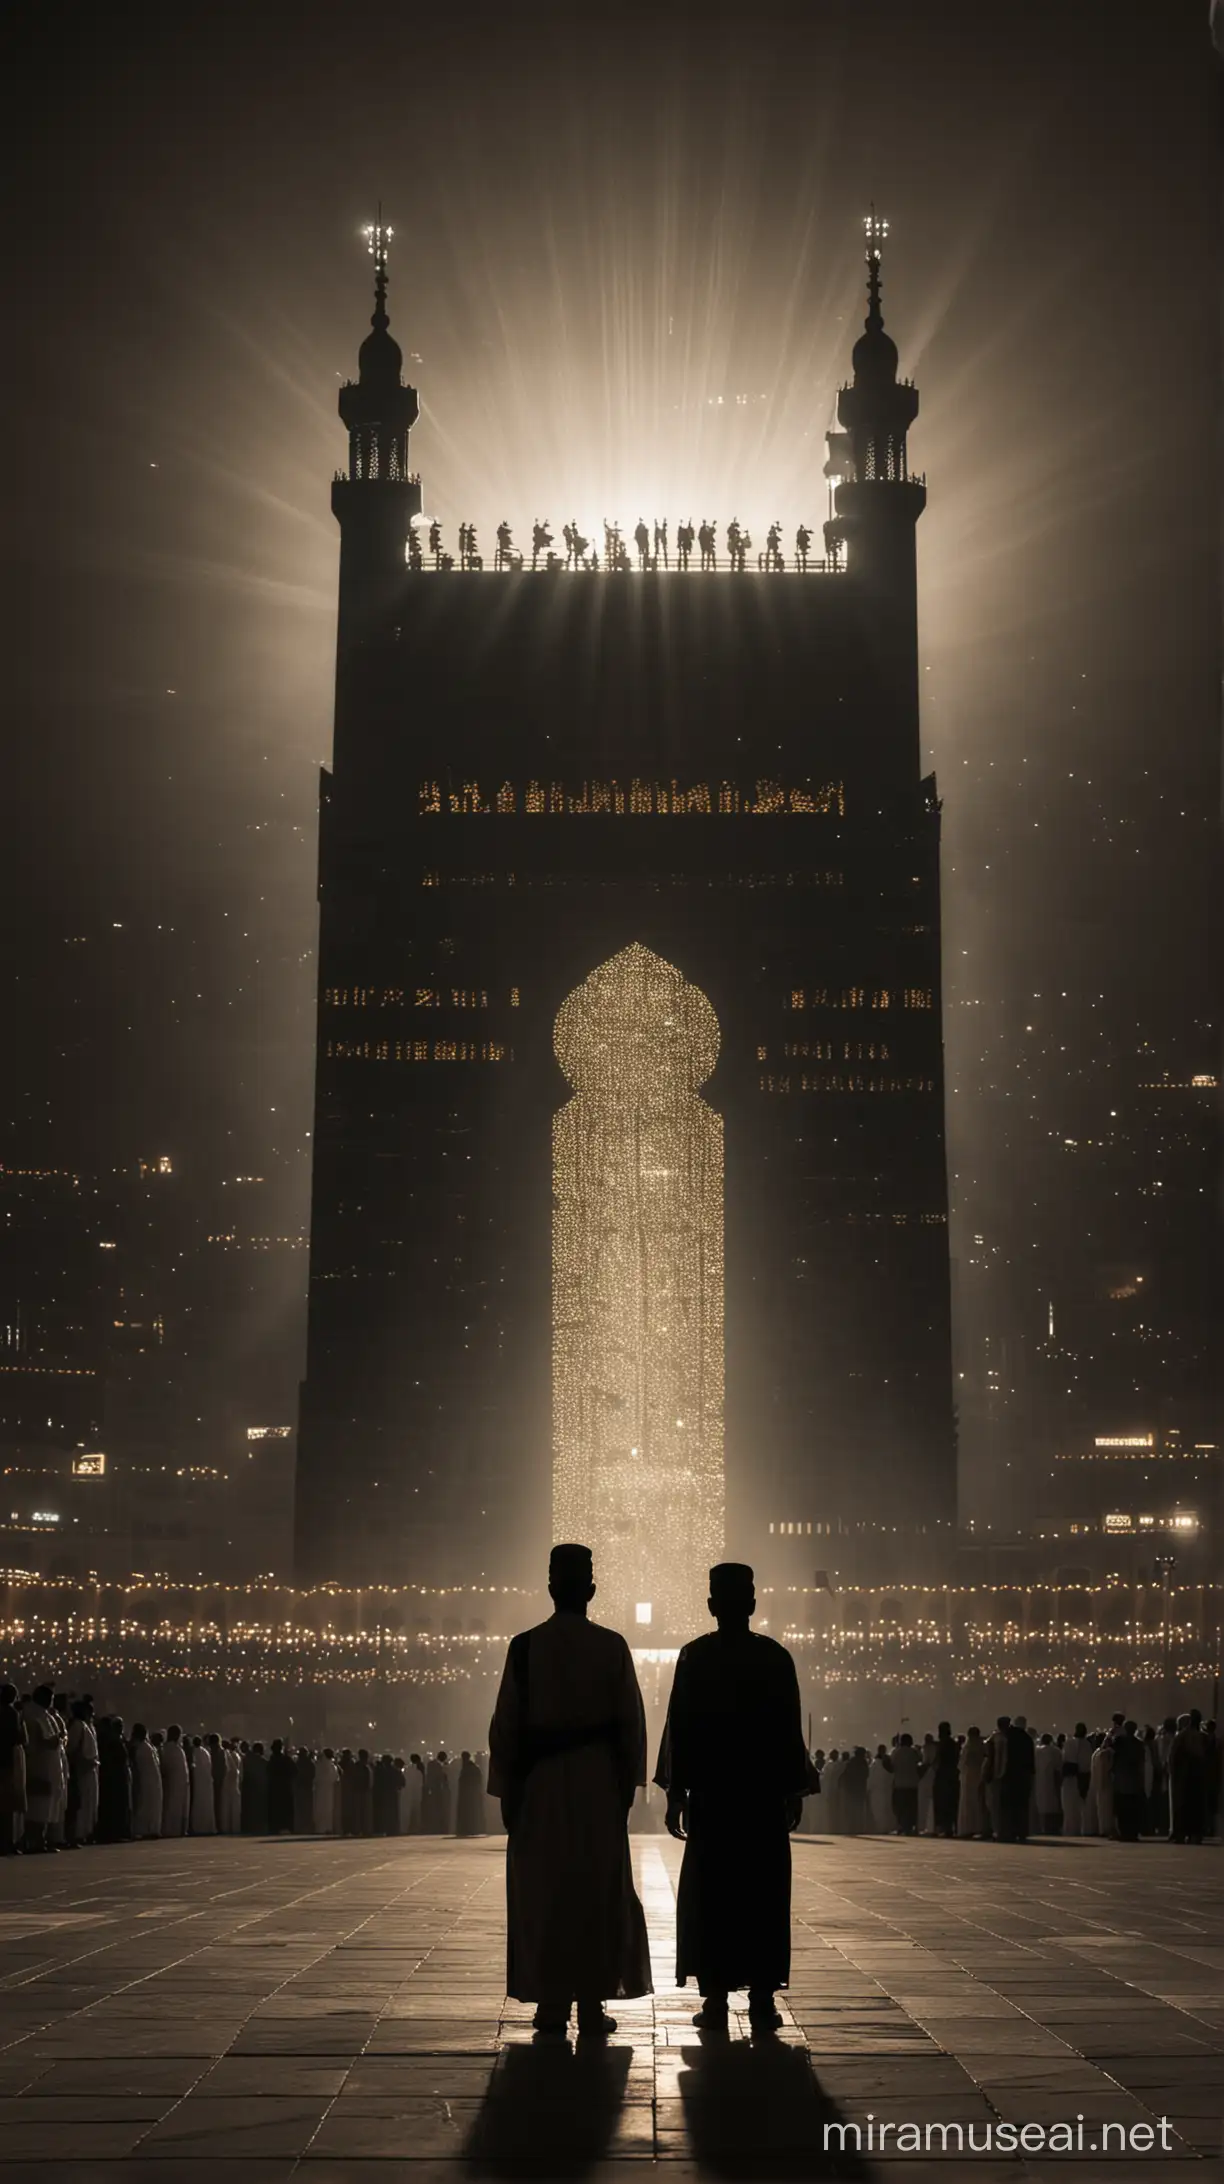 An illuminated silhouette of Muhammad ibn Abdullah, known as Al-Amin, standing before the Kaaba in Mecca, radiating integrity and trustworthiness amidst the bustling city.
